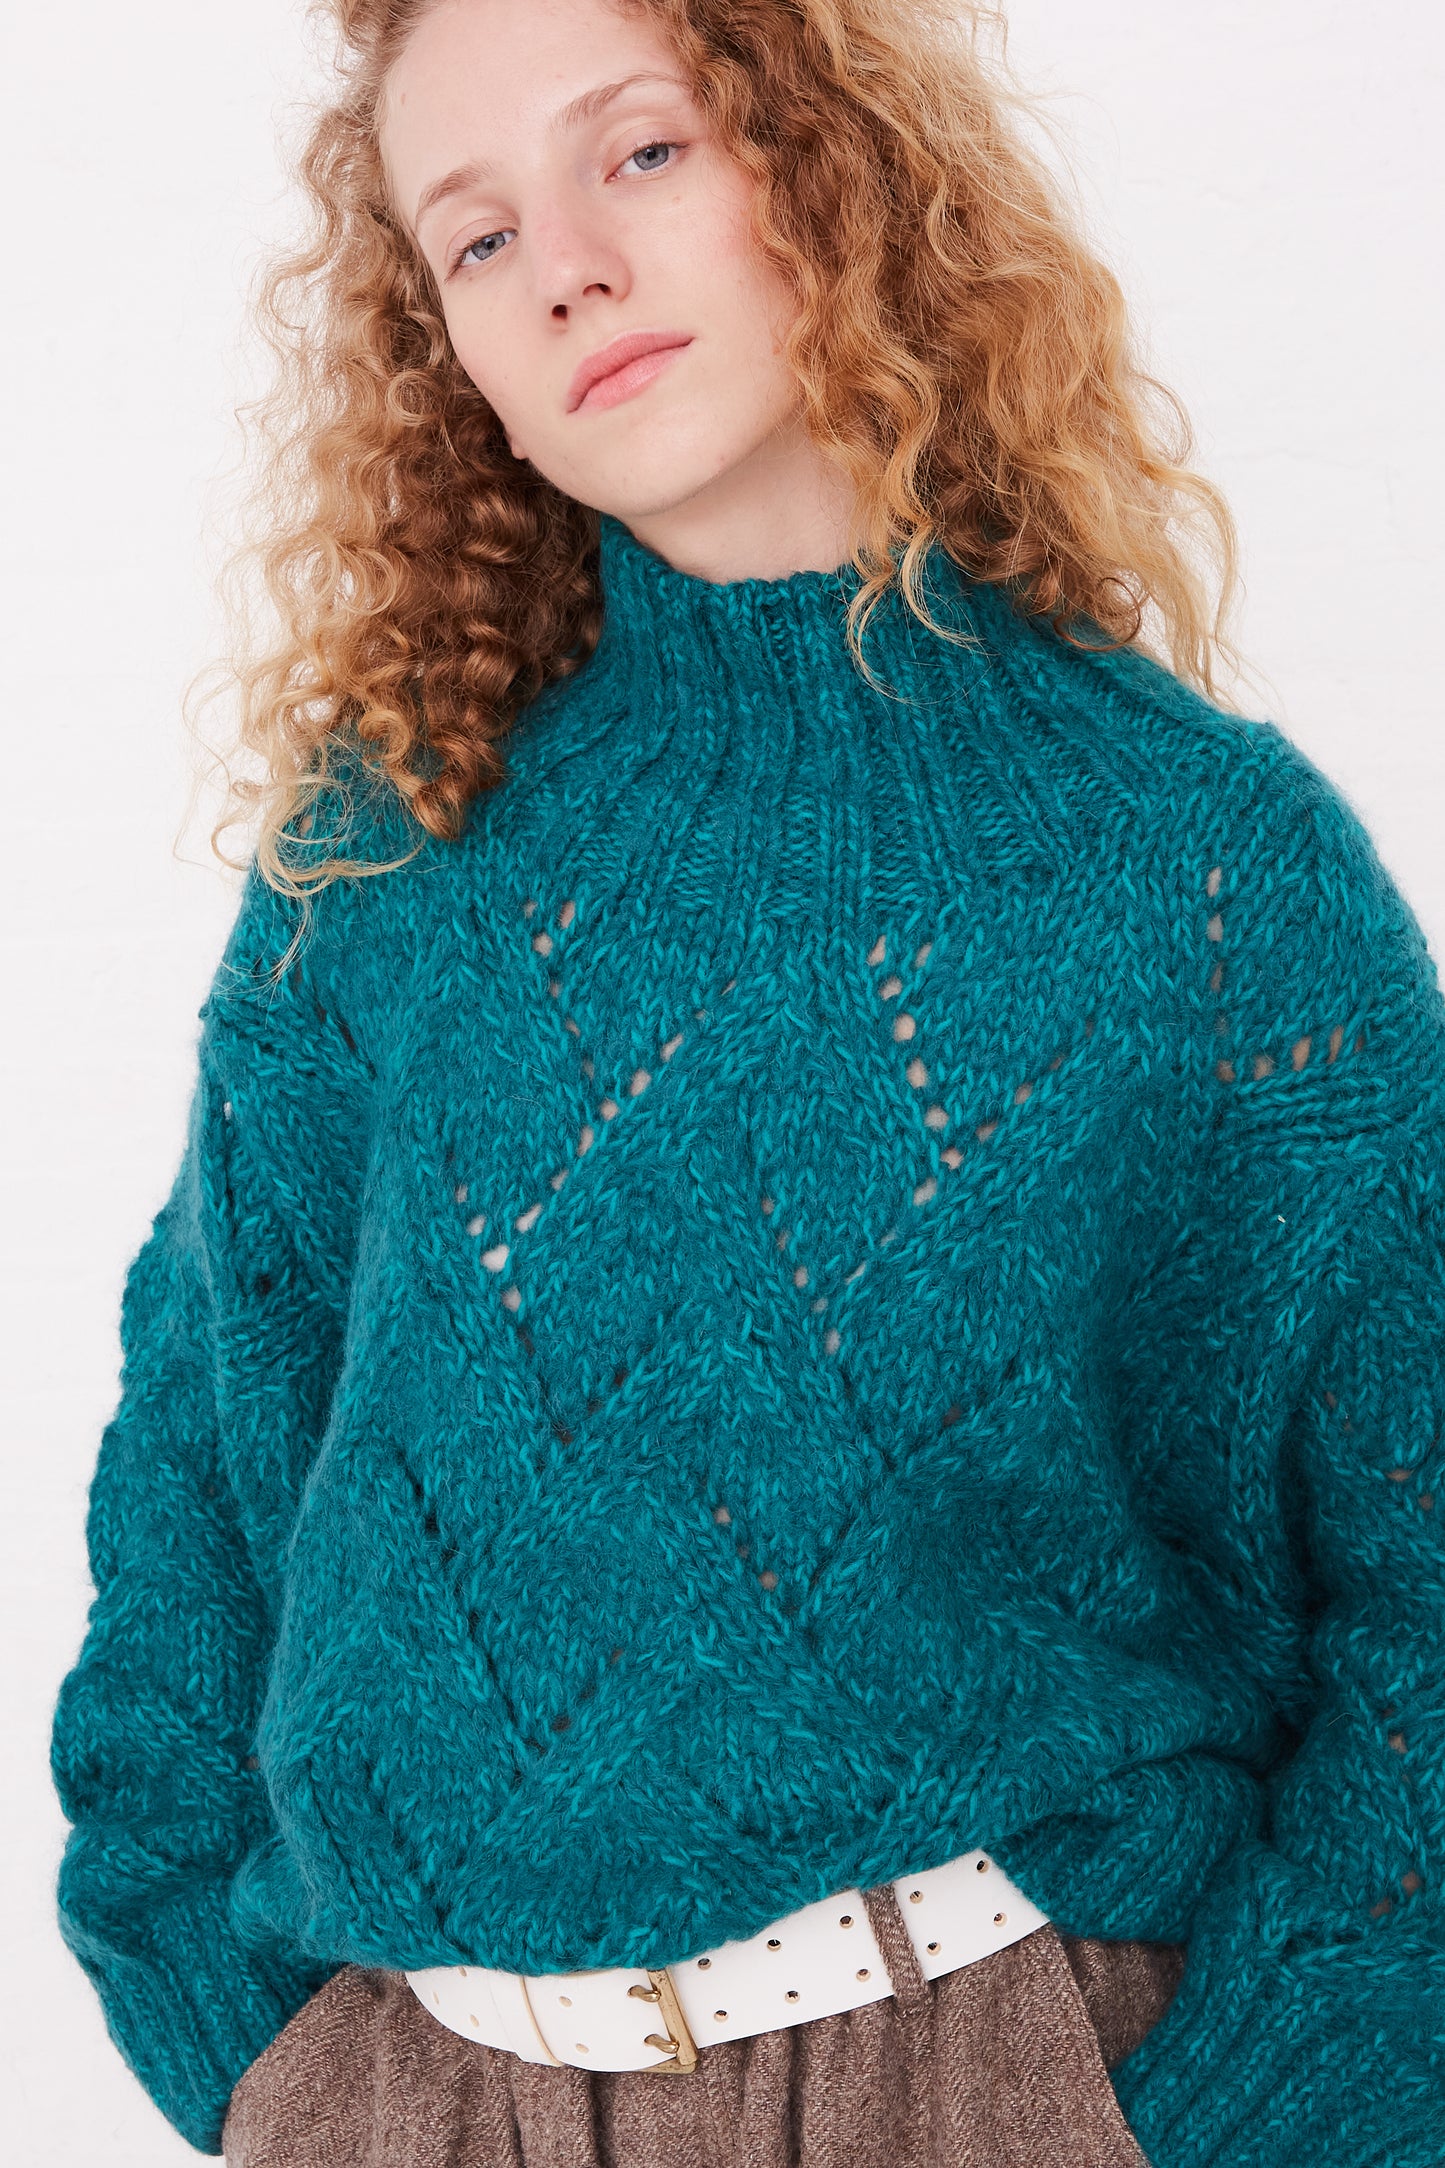 A woman wearing an oversized Ichi Antiquités Hand-Knit Turtleneck in Green Teal sweater.